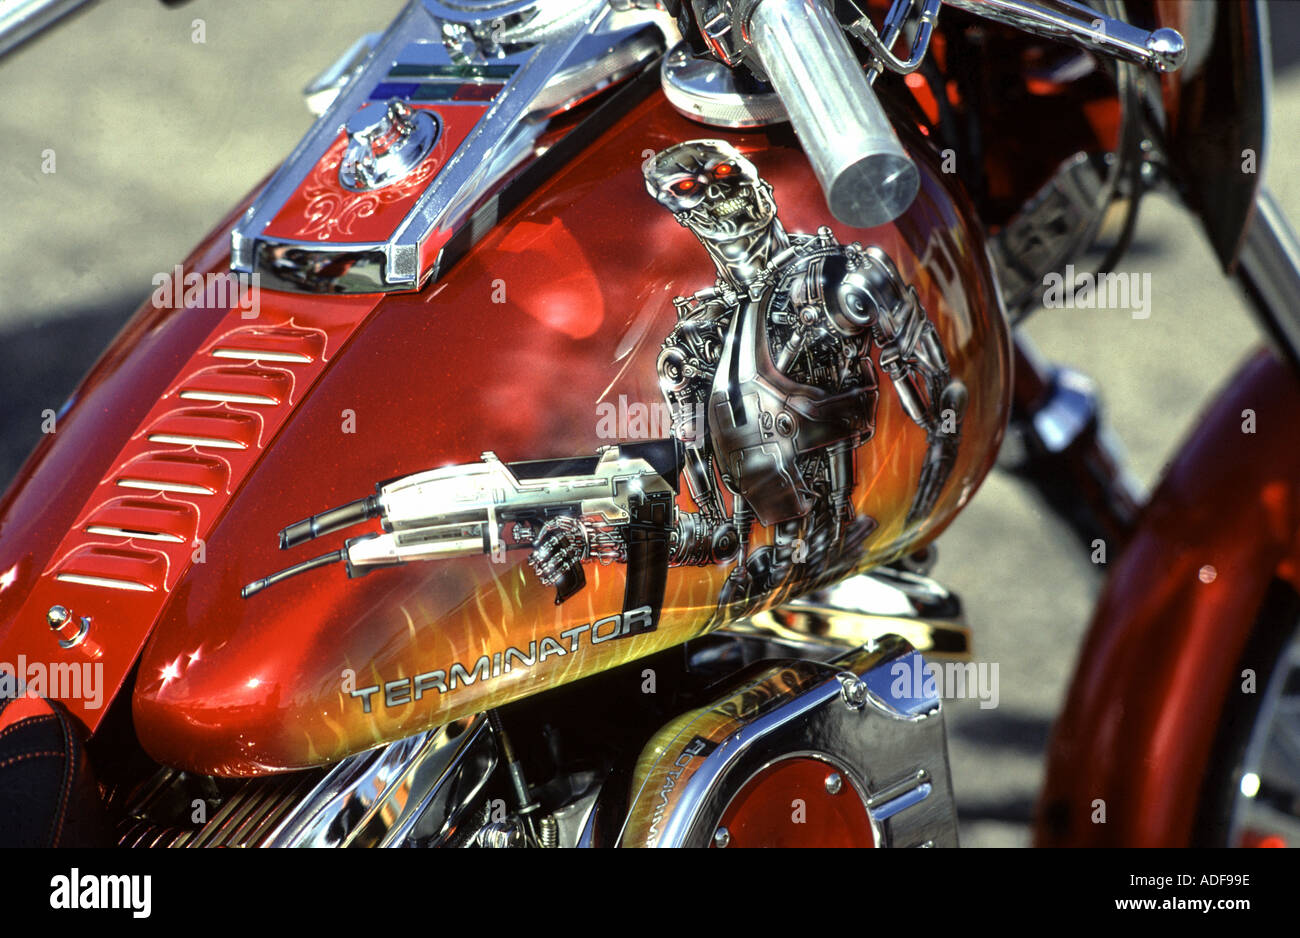 Terminator figure painted on the gas tank of a customised Harley Davidson motorcycle Stock Photo